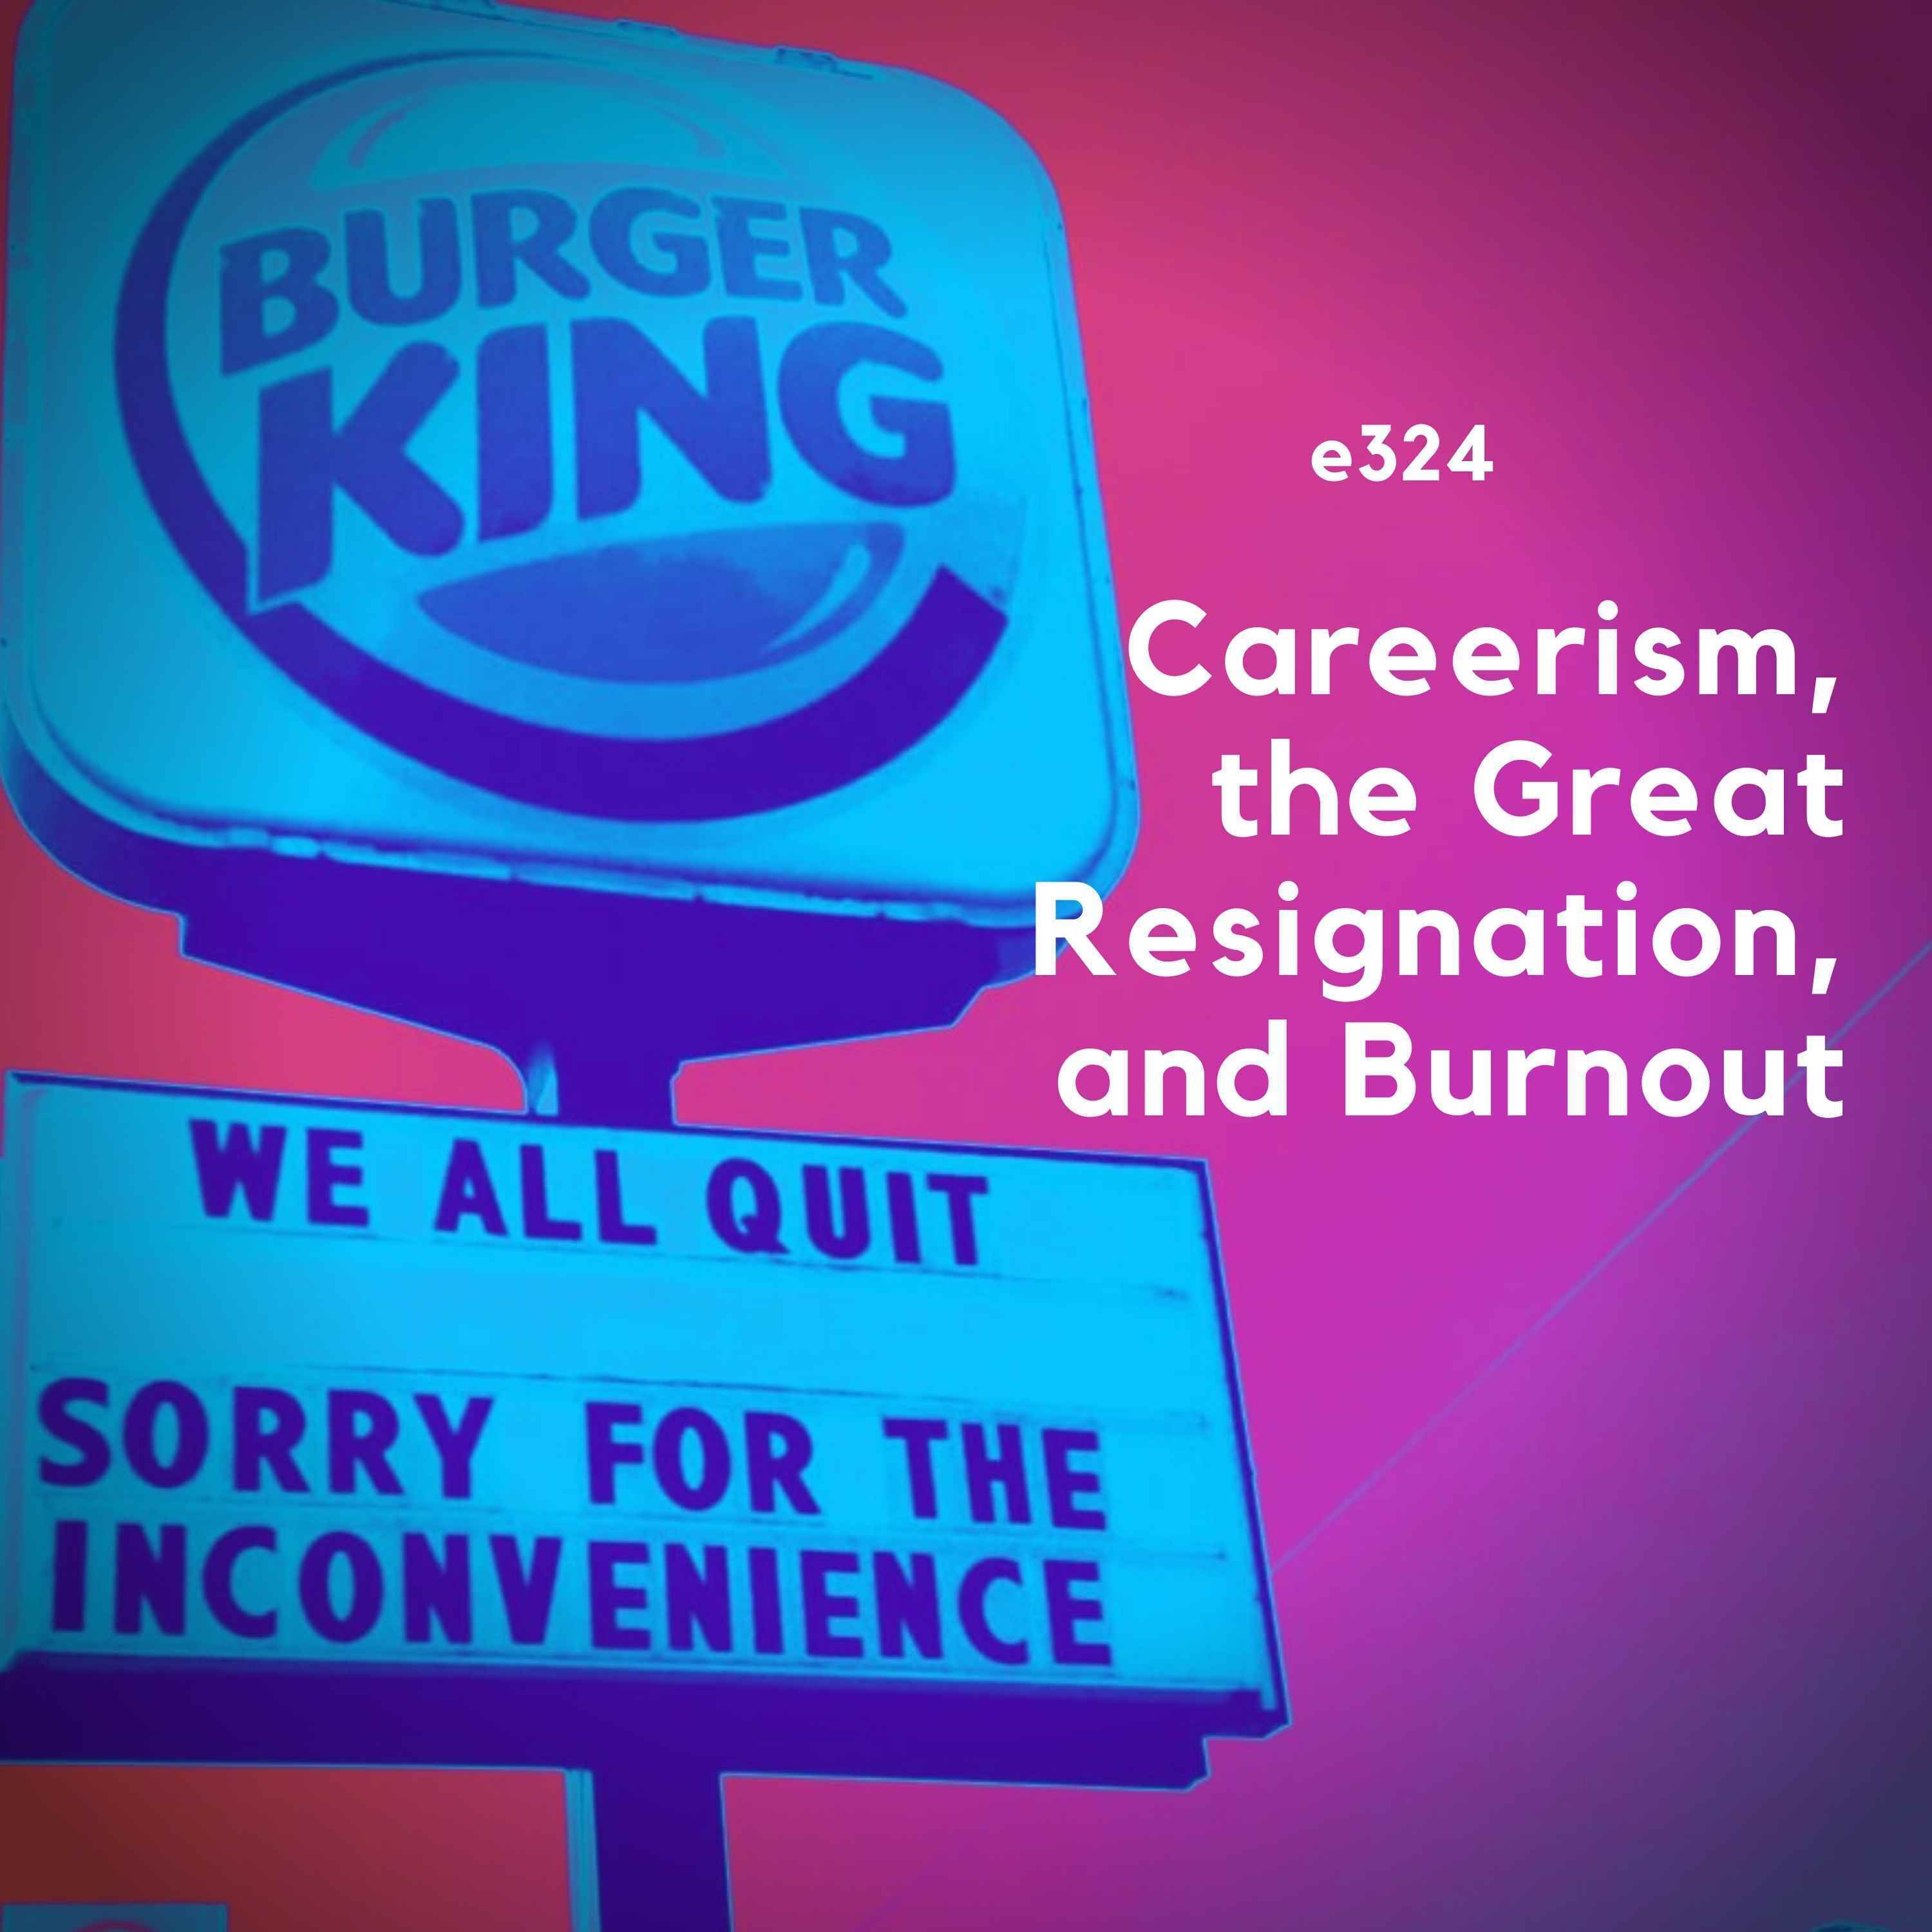 Careerism, the Great Resignation, and Burnout